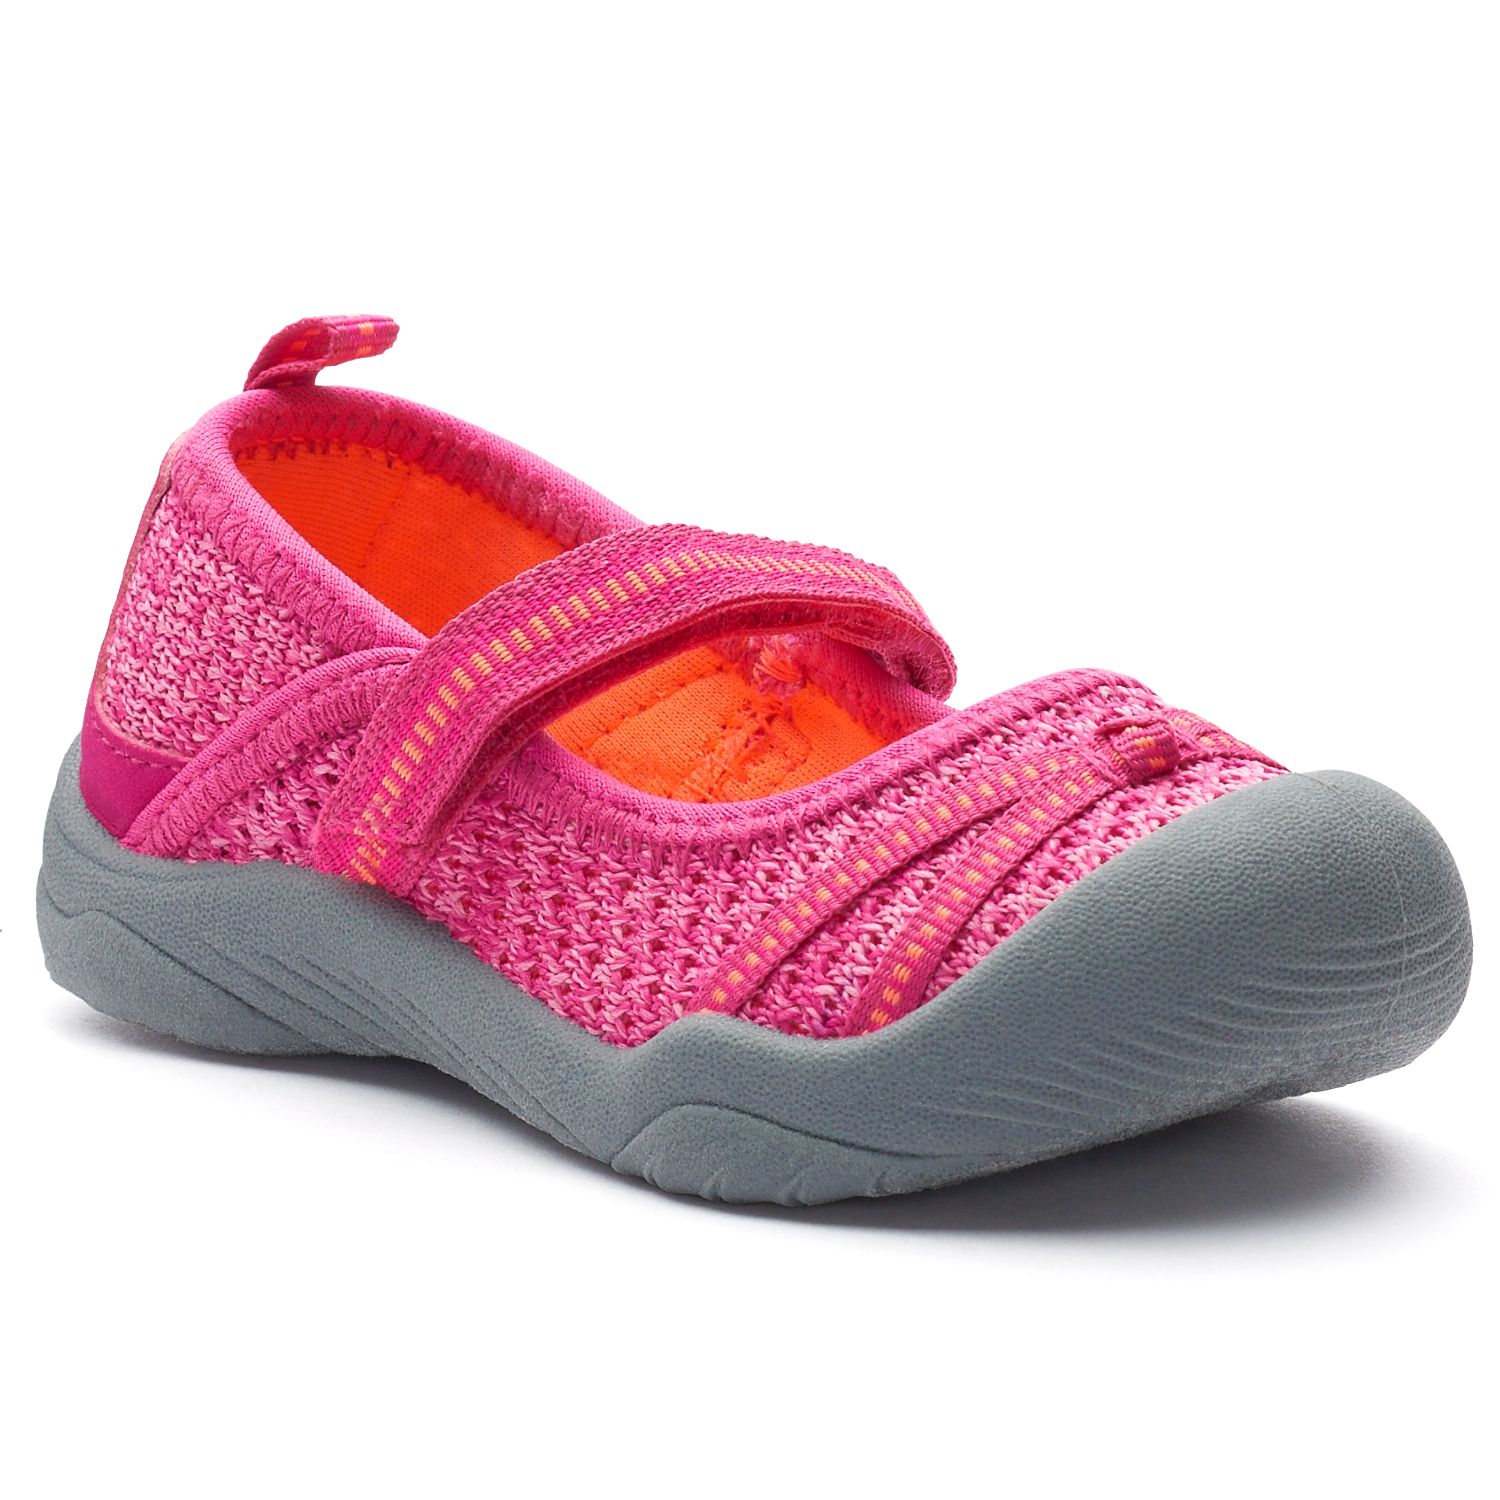 girls mary jane tennis shoes